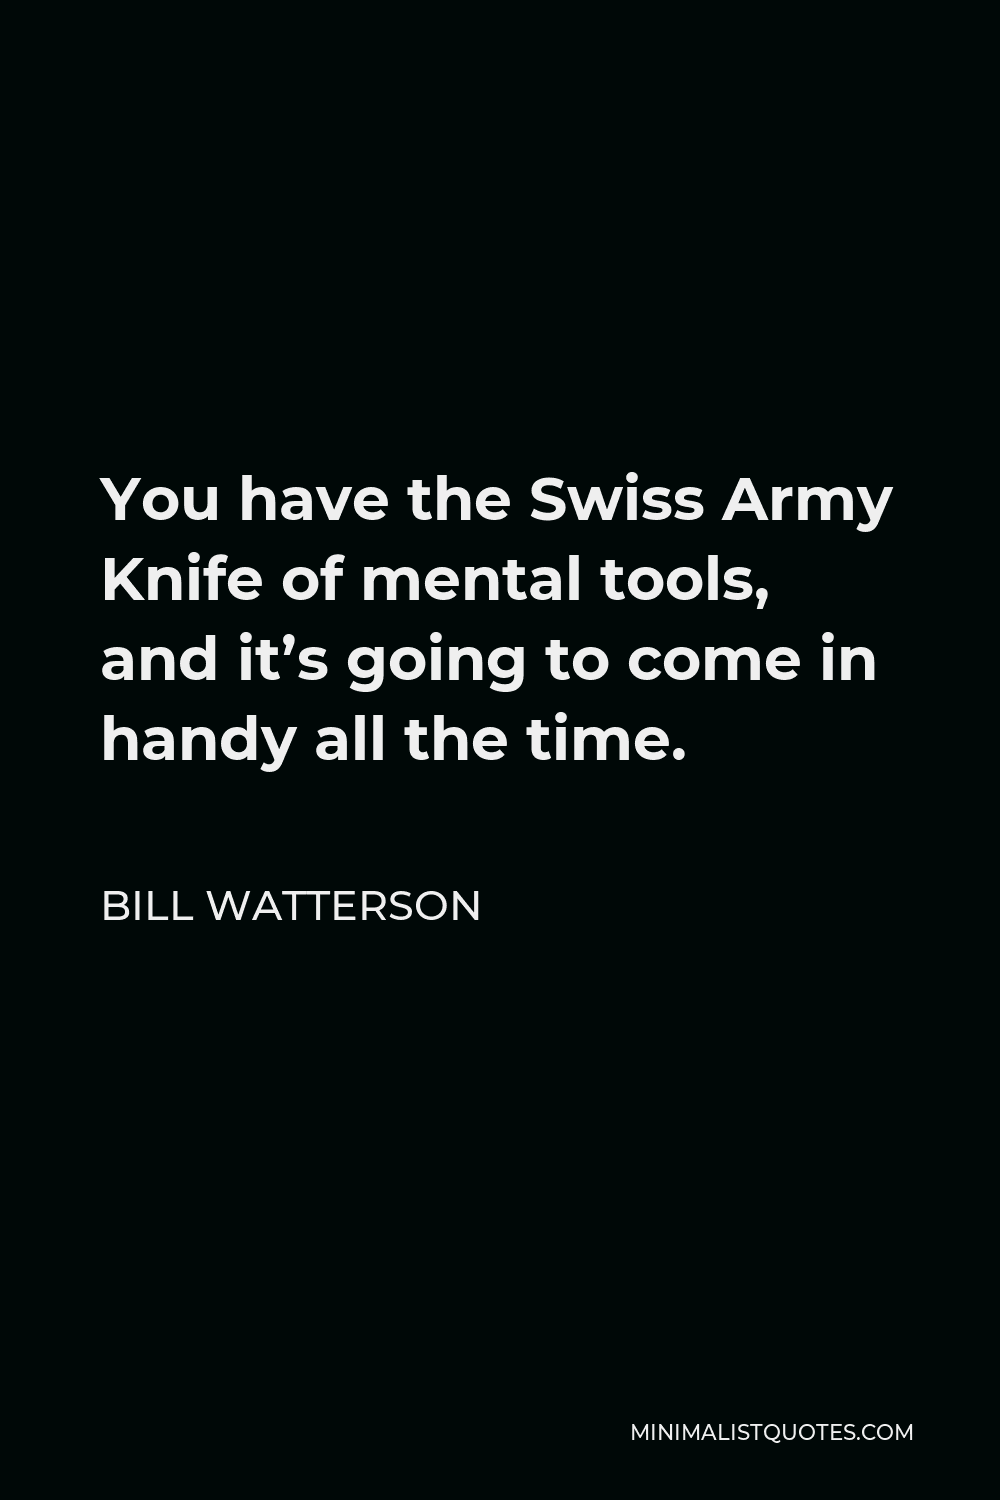 Bill Watterson Quote - You have the Swiss Army Knife of mental tools, and it’s going to come in handy all the time.